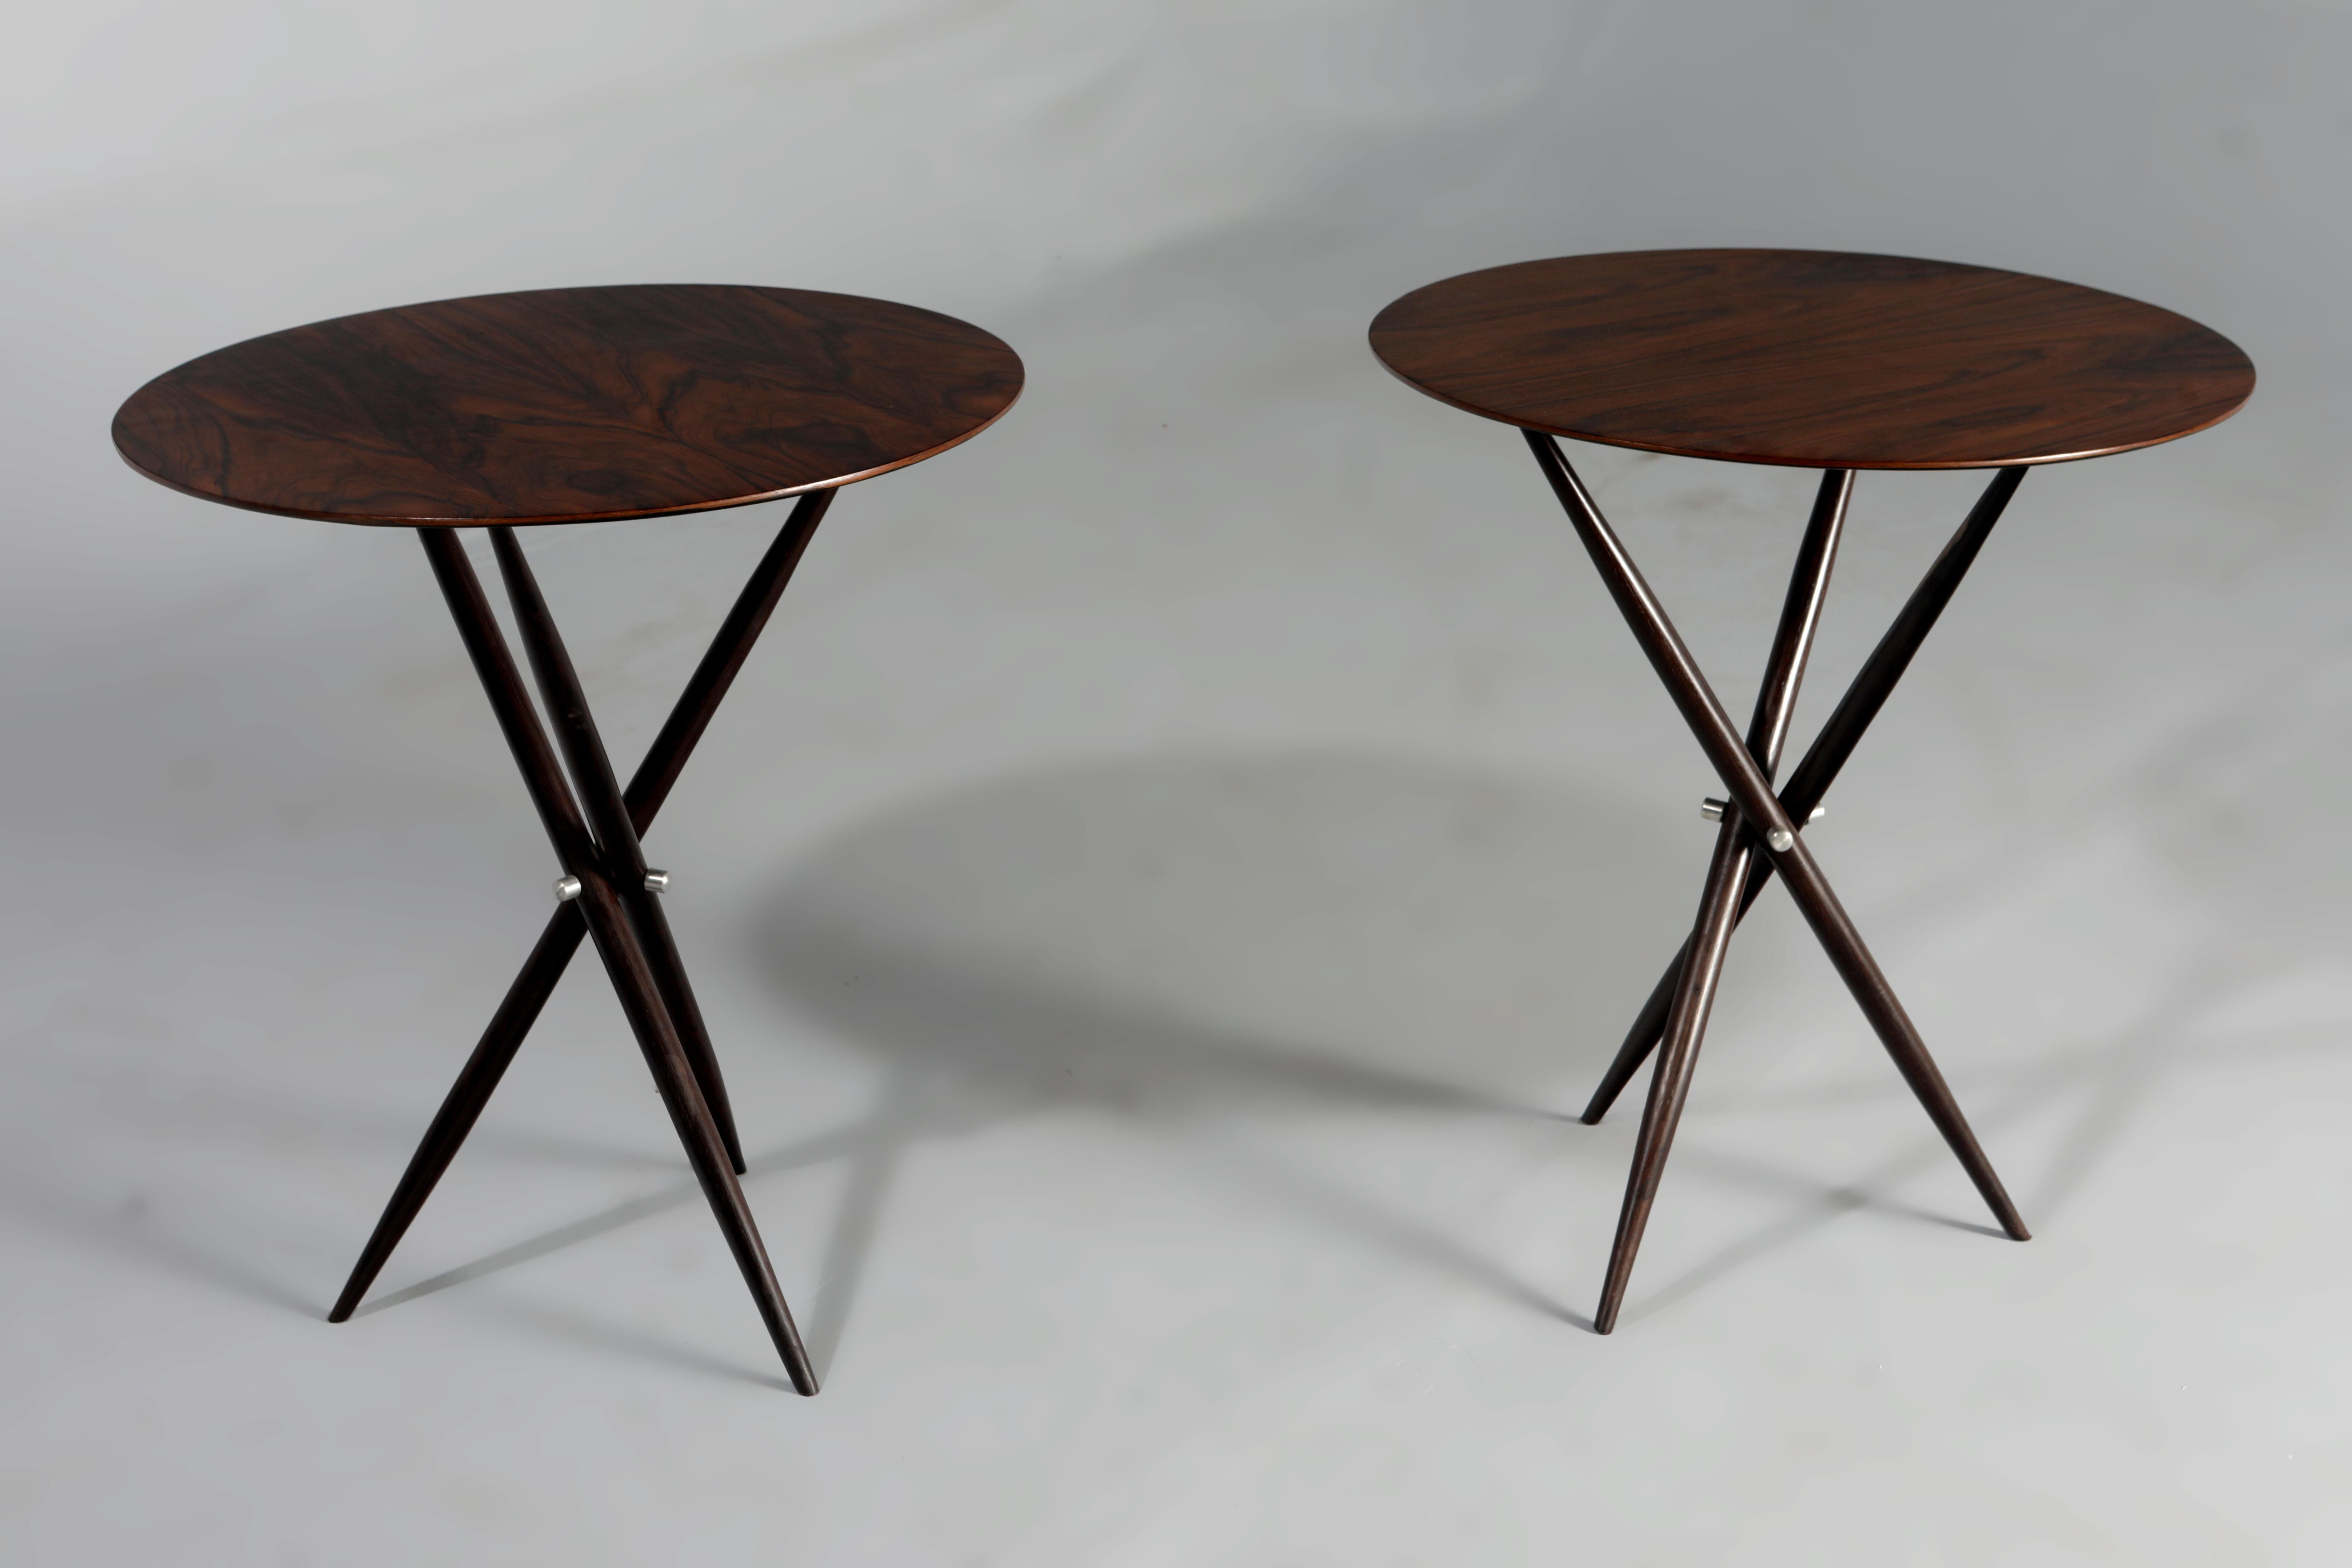 Varnished Mid-Century Modern Janete Side Table by Sergio Rodrigues, Brazil, 1950s